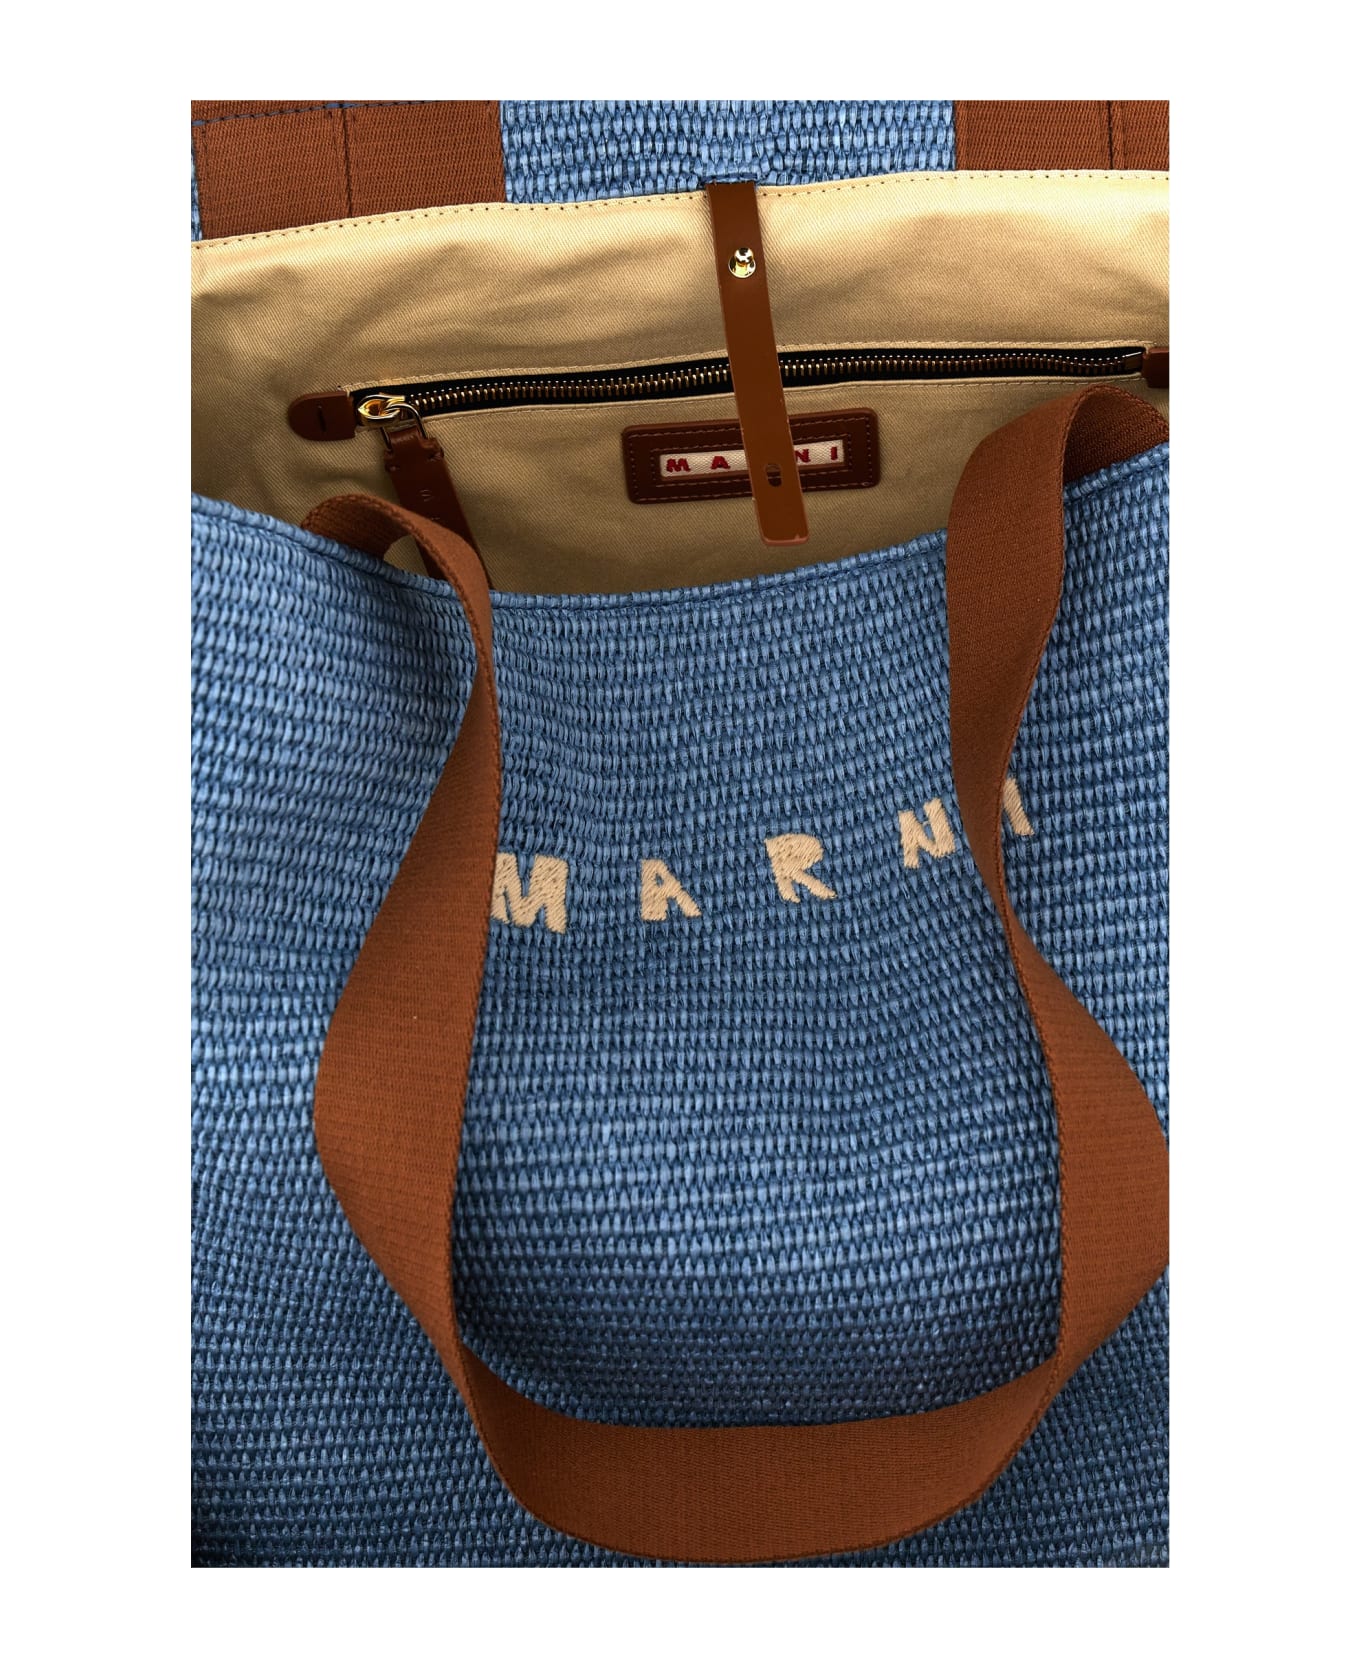 Marni Large Shopping Bag With Logo Embroidery - Clear Blue